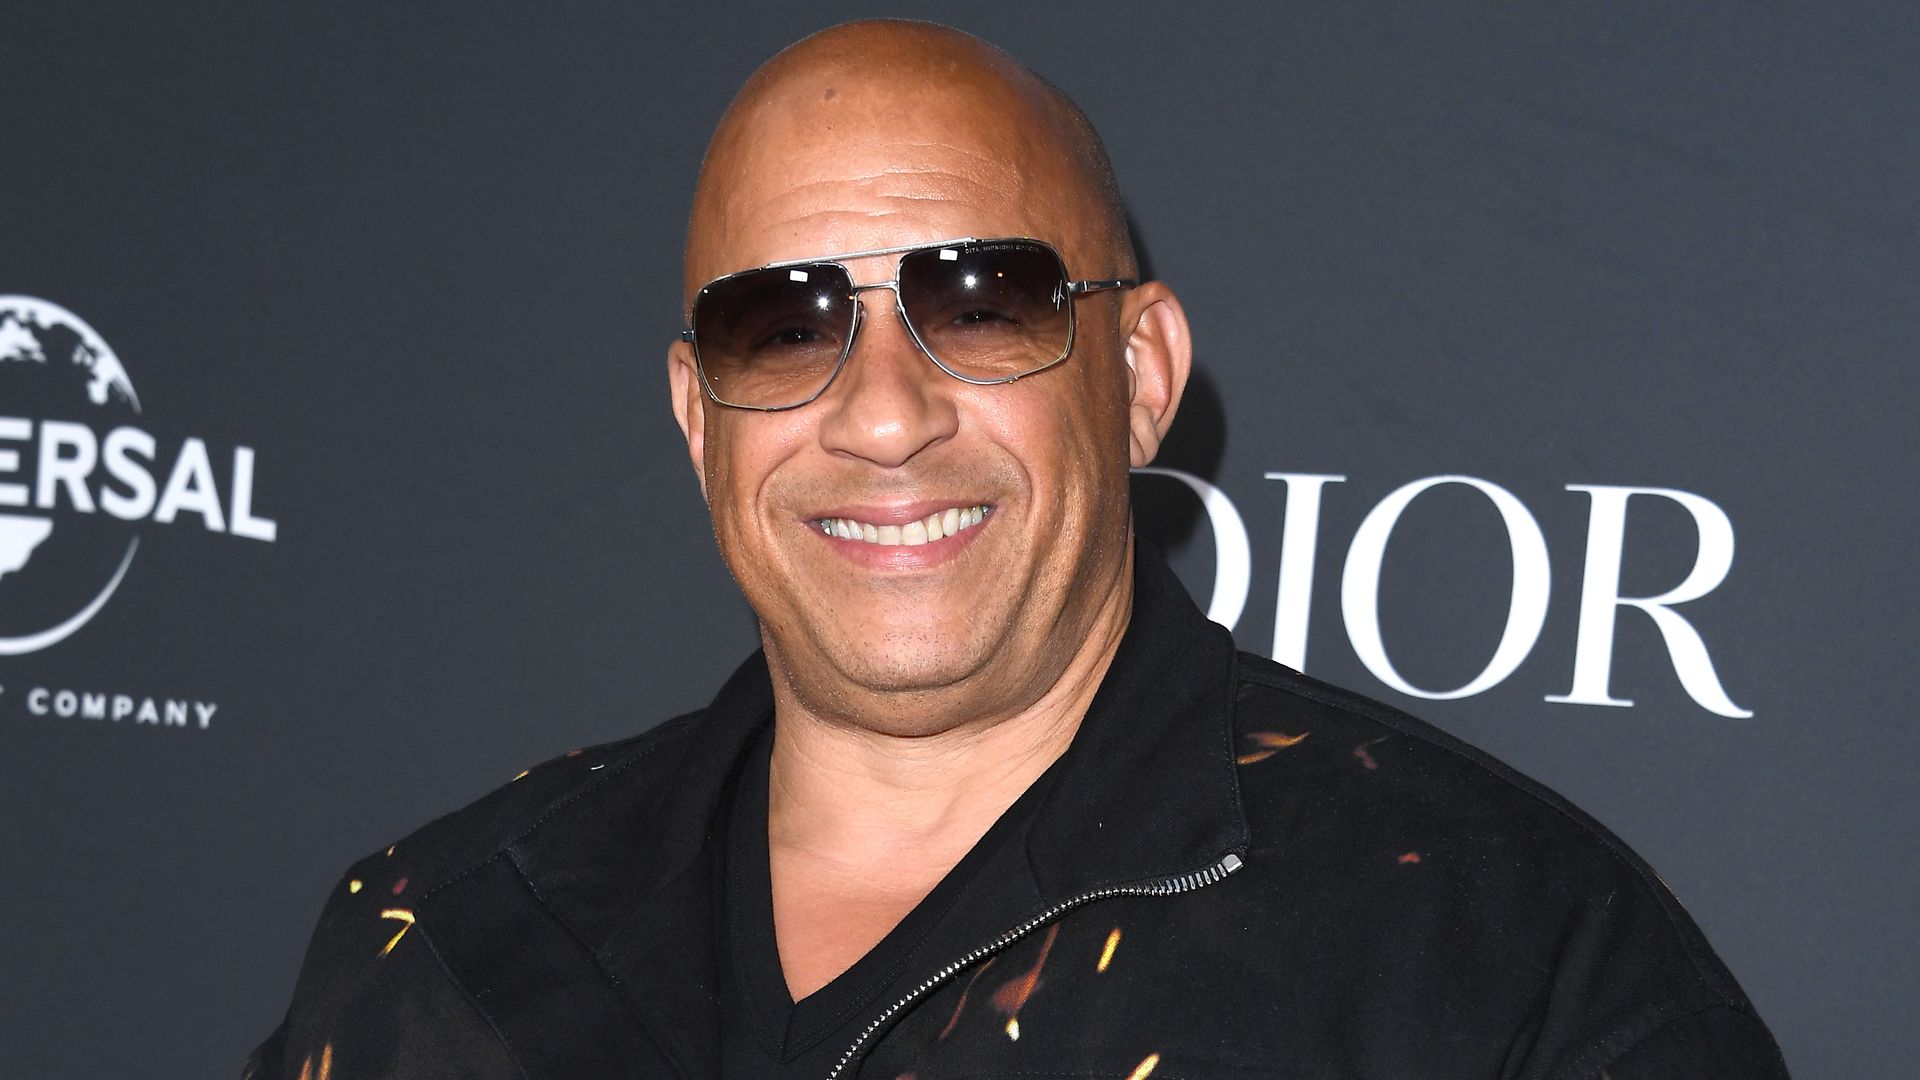 Vin Diesel smiling for a red carpet photo wearing sunglasses